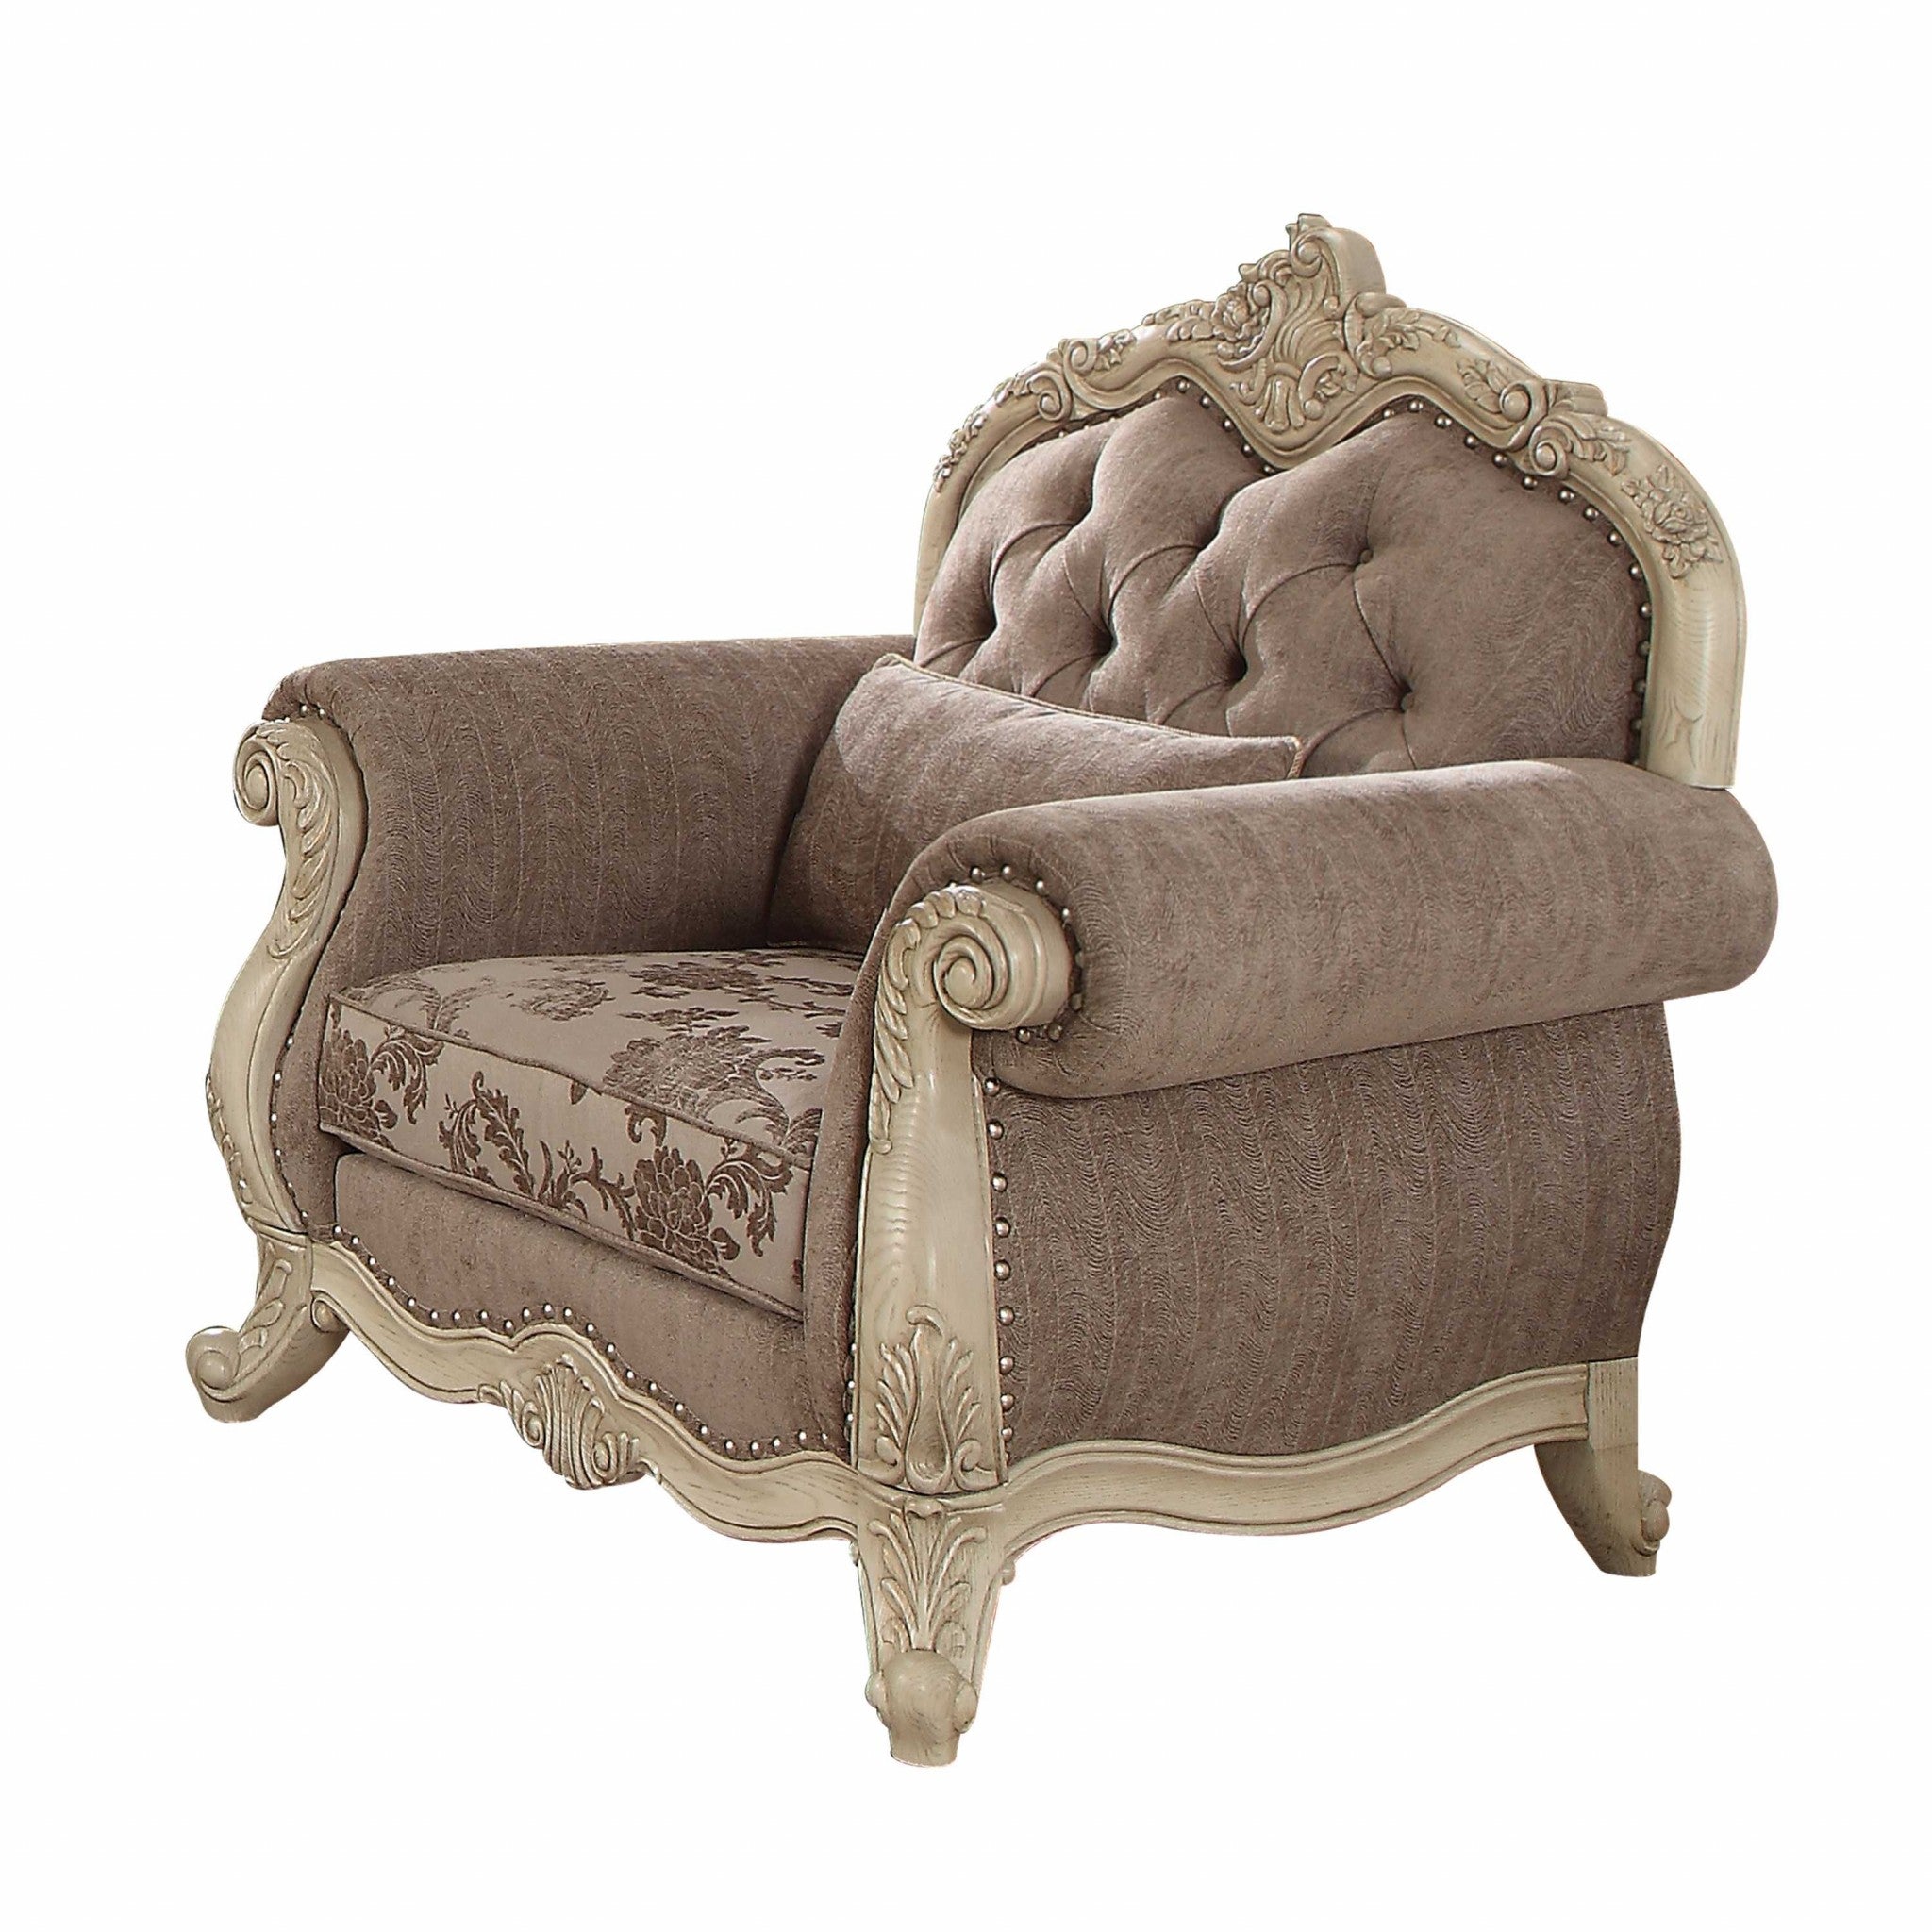 35" Gray And Pearl Fabric Damask Tufted Chesterfield Chair